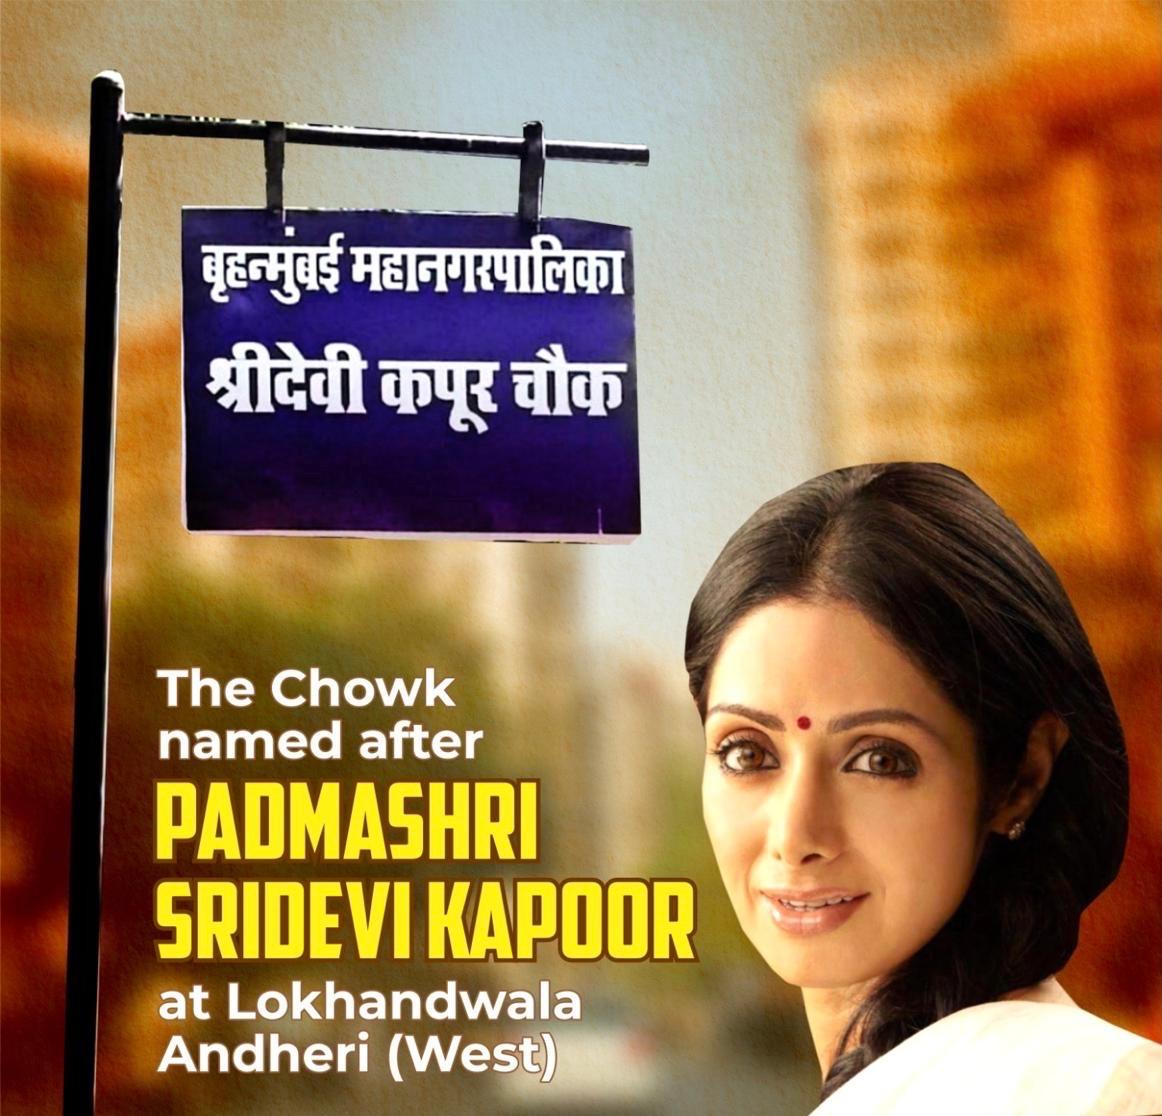 Honour To Eternal #Sridevi !! A junction in the Lokhandwala Complex locality of Andheri, Bombay has been named Sreedevi Kapoor Chowk. @BoneyKapoor The chowk is on the same road on which the late actress lived with husband Boney Kapoor and her two daughters, Janhvi and Khushi,